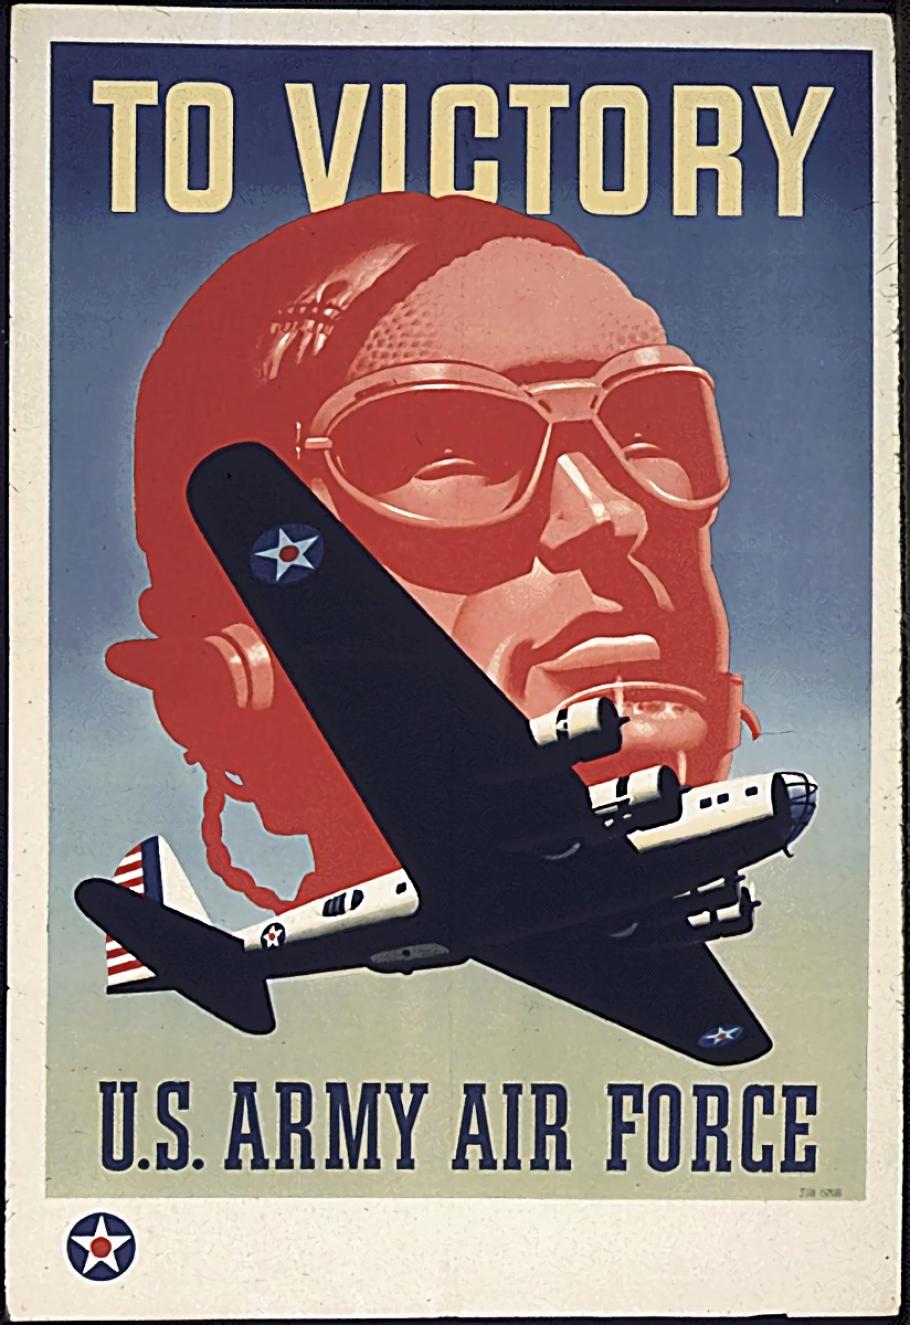 Colorful World War II Posters: A Message from the U.S. Government |  National Air and Space Museum